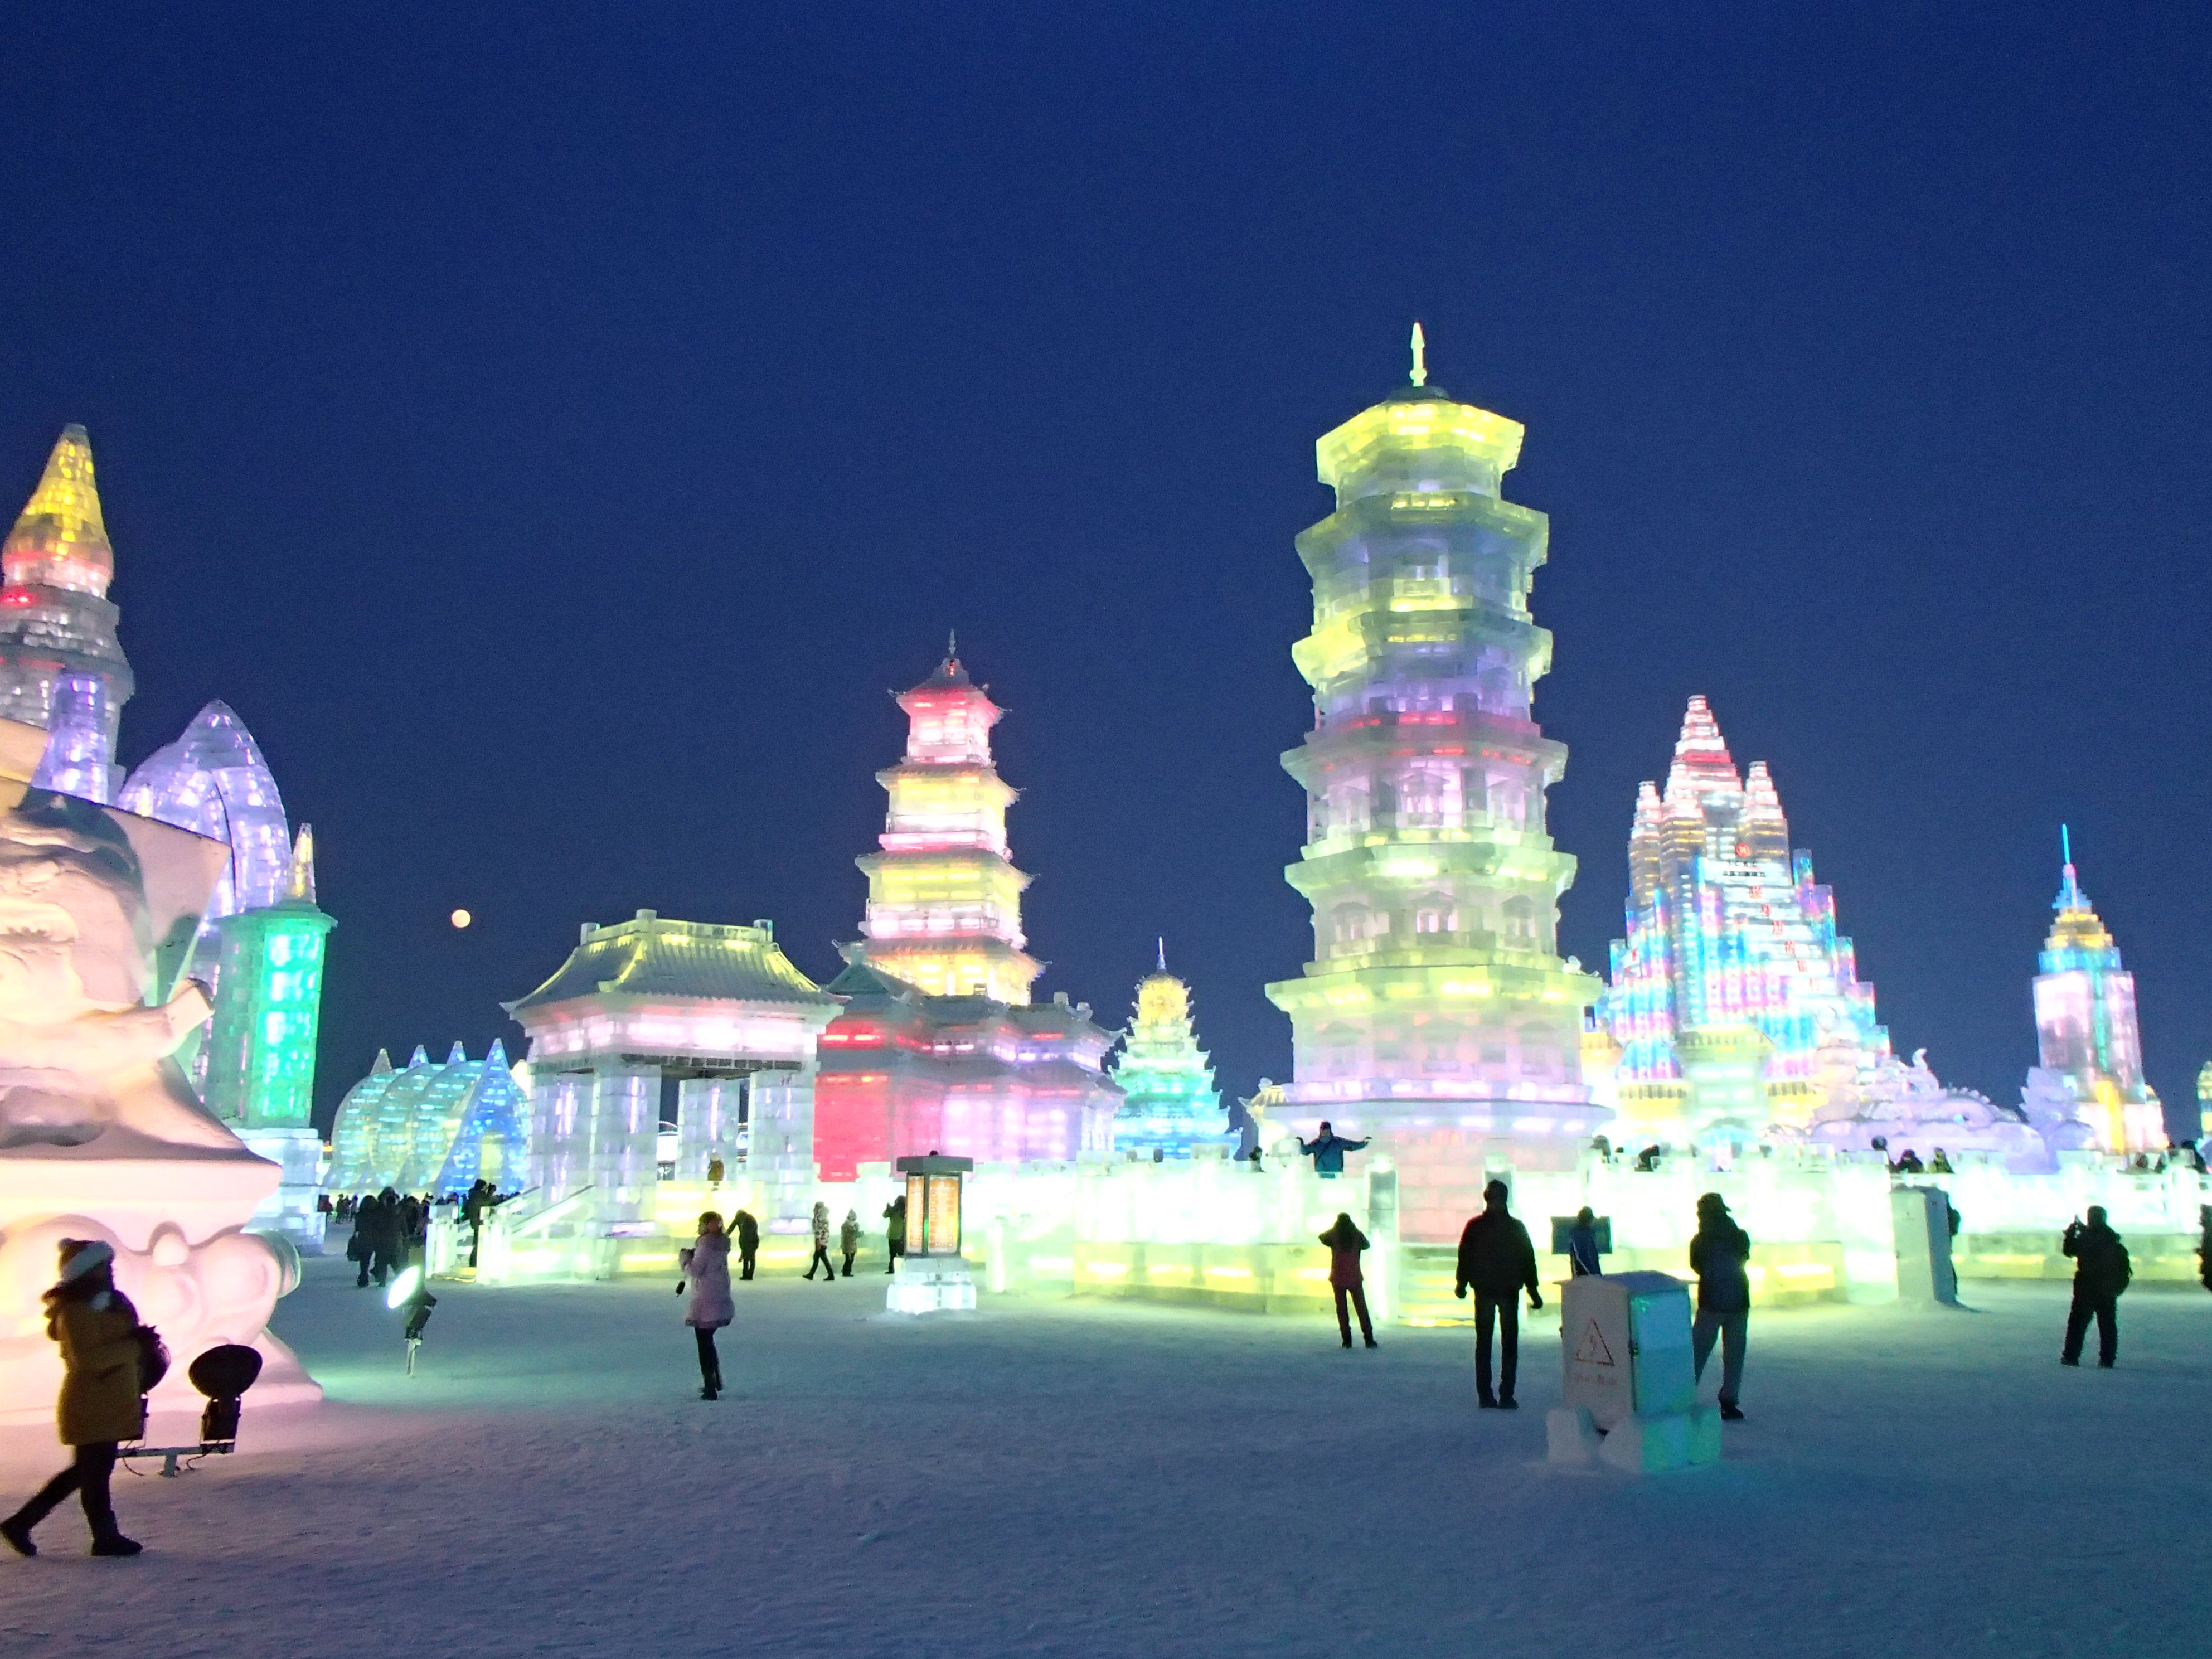 A Guide to: Harbin Ice and Snow Festival